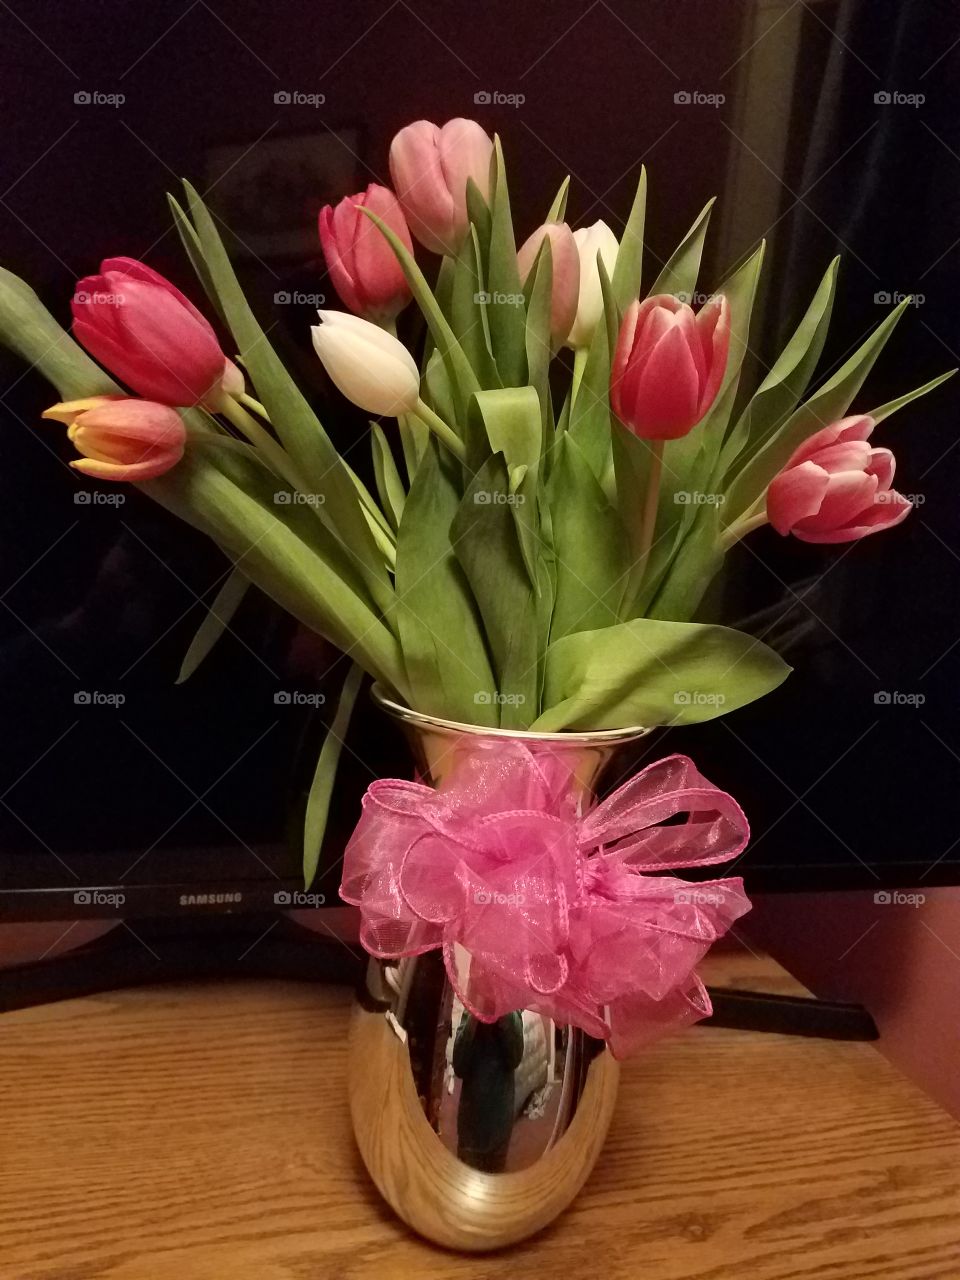 Tulips  with  a pink bow